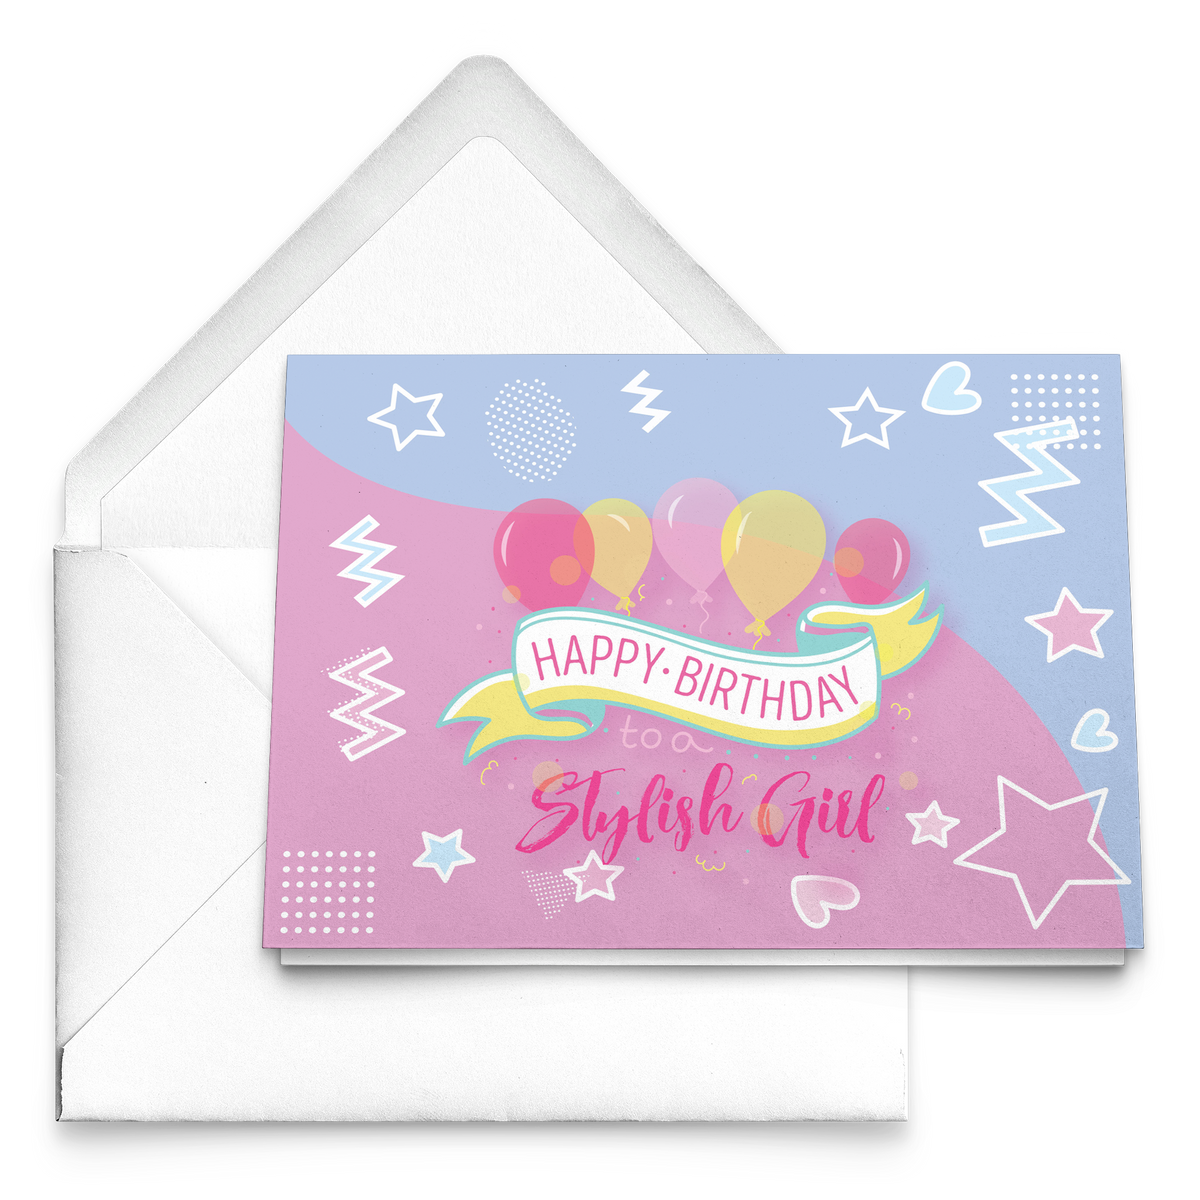 HAPPY BIRTHDAY TO A STYLISH GIRL! NOTE CARD